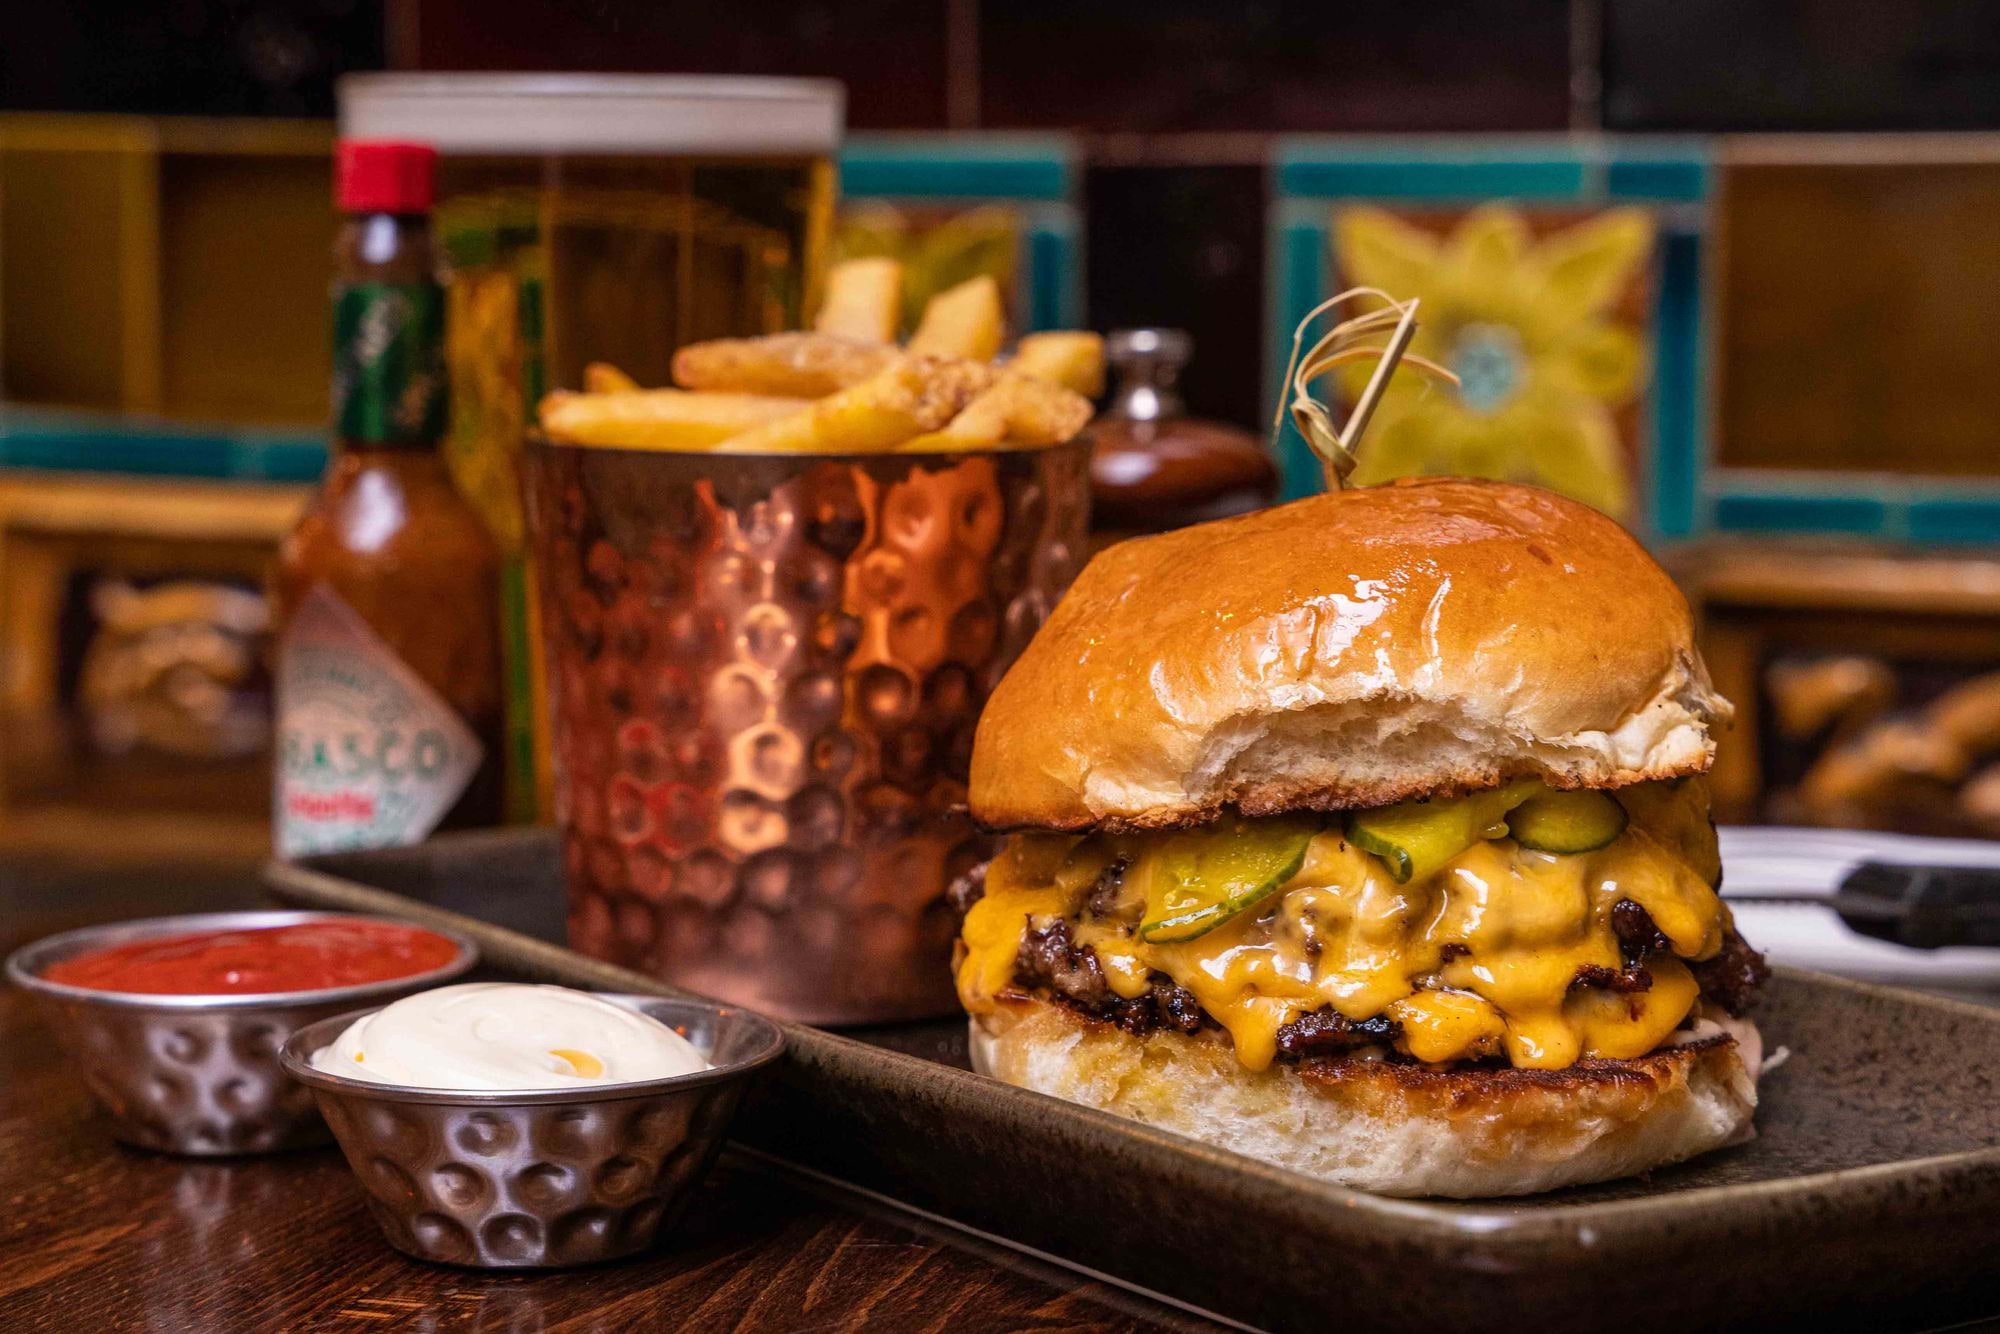 Get 50% off food at this new pub in Waterloo